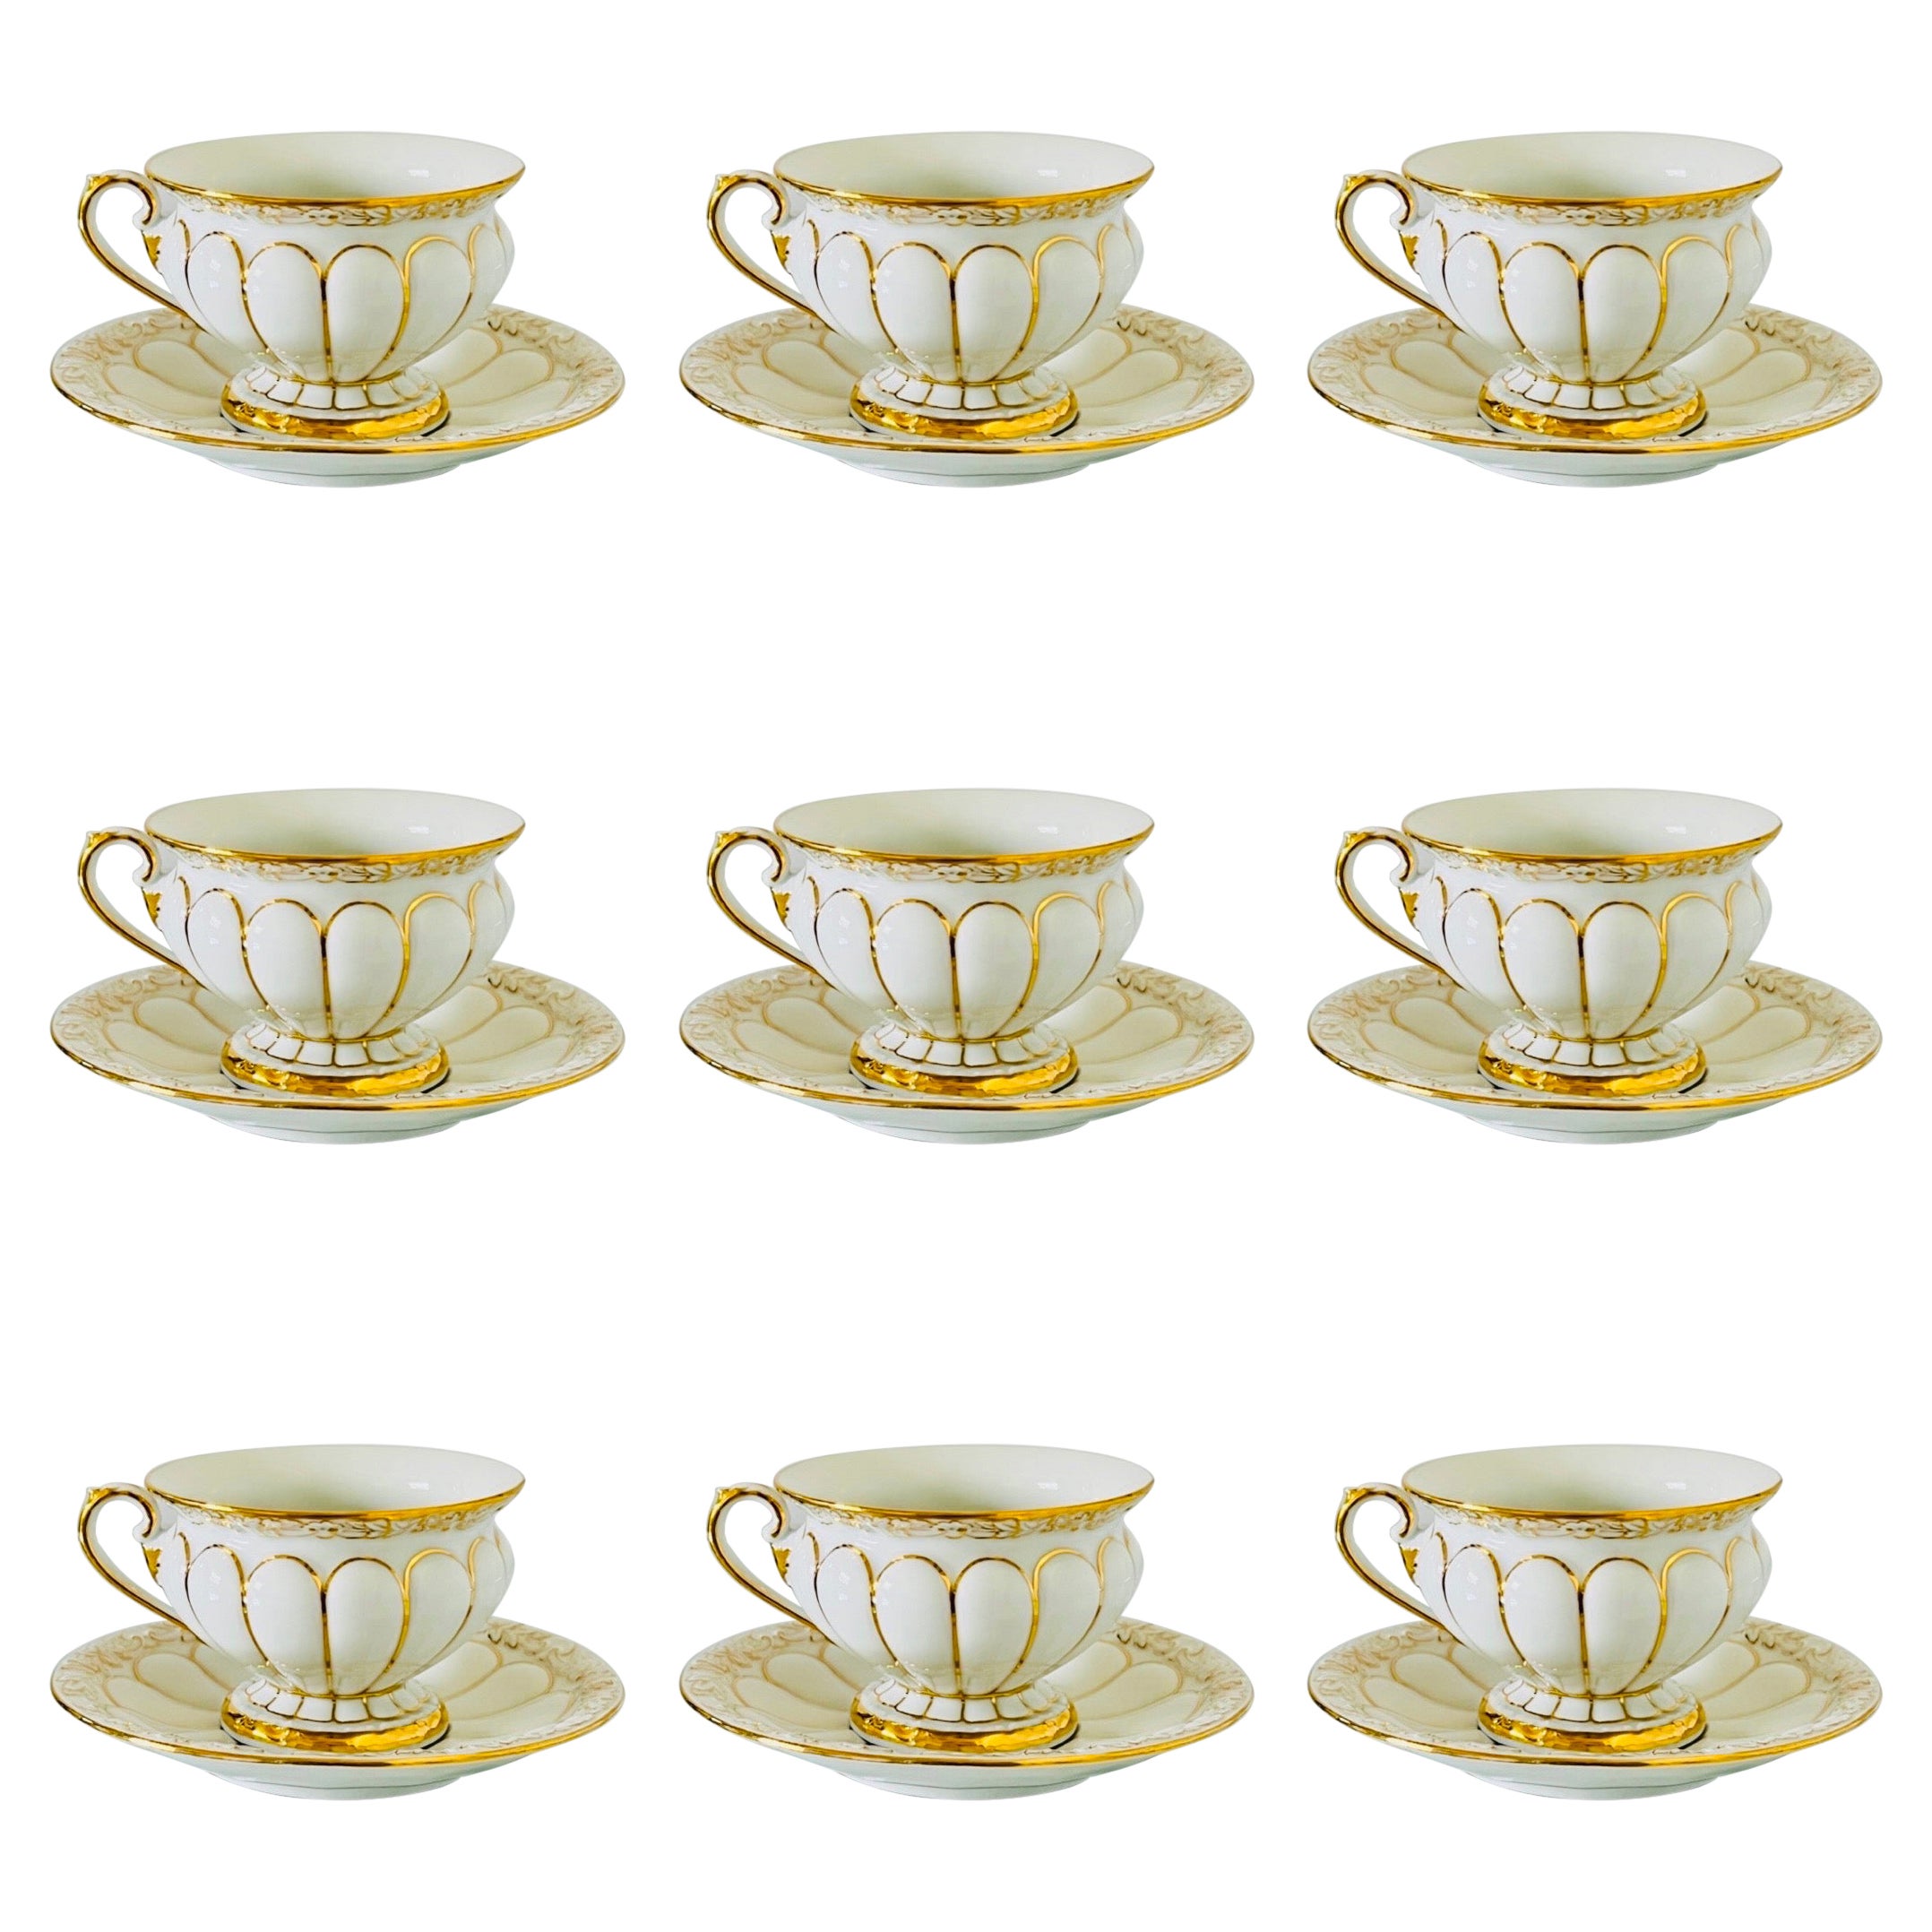 Meissen Germany Baroque Porcelain and Gold Cups and Saucers, Set / 13